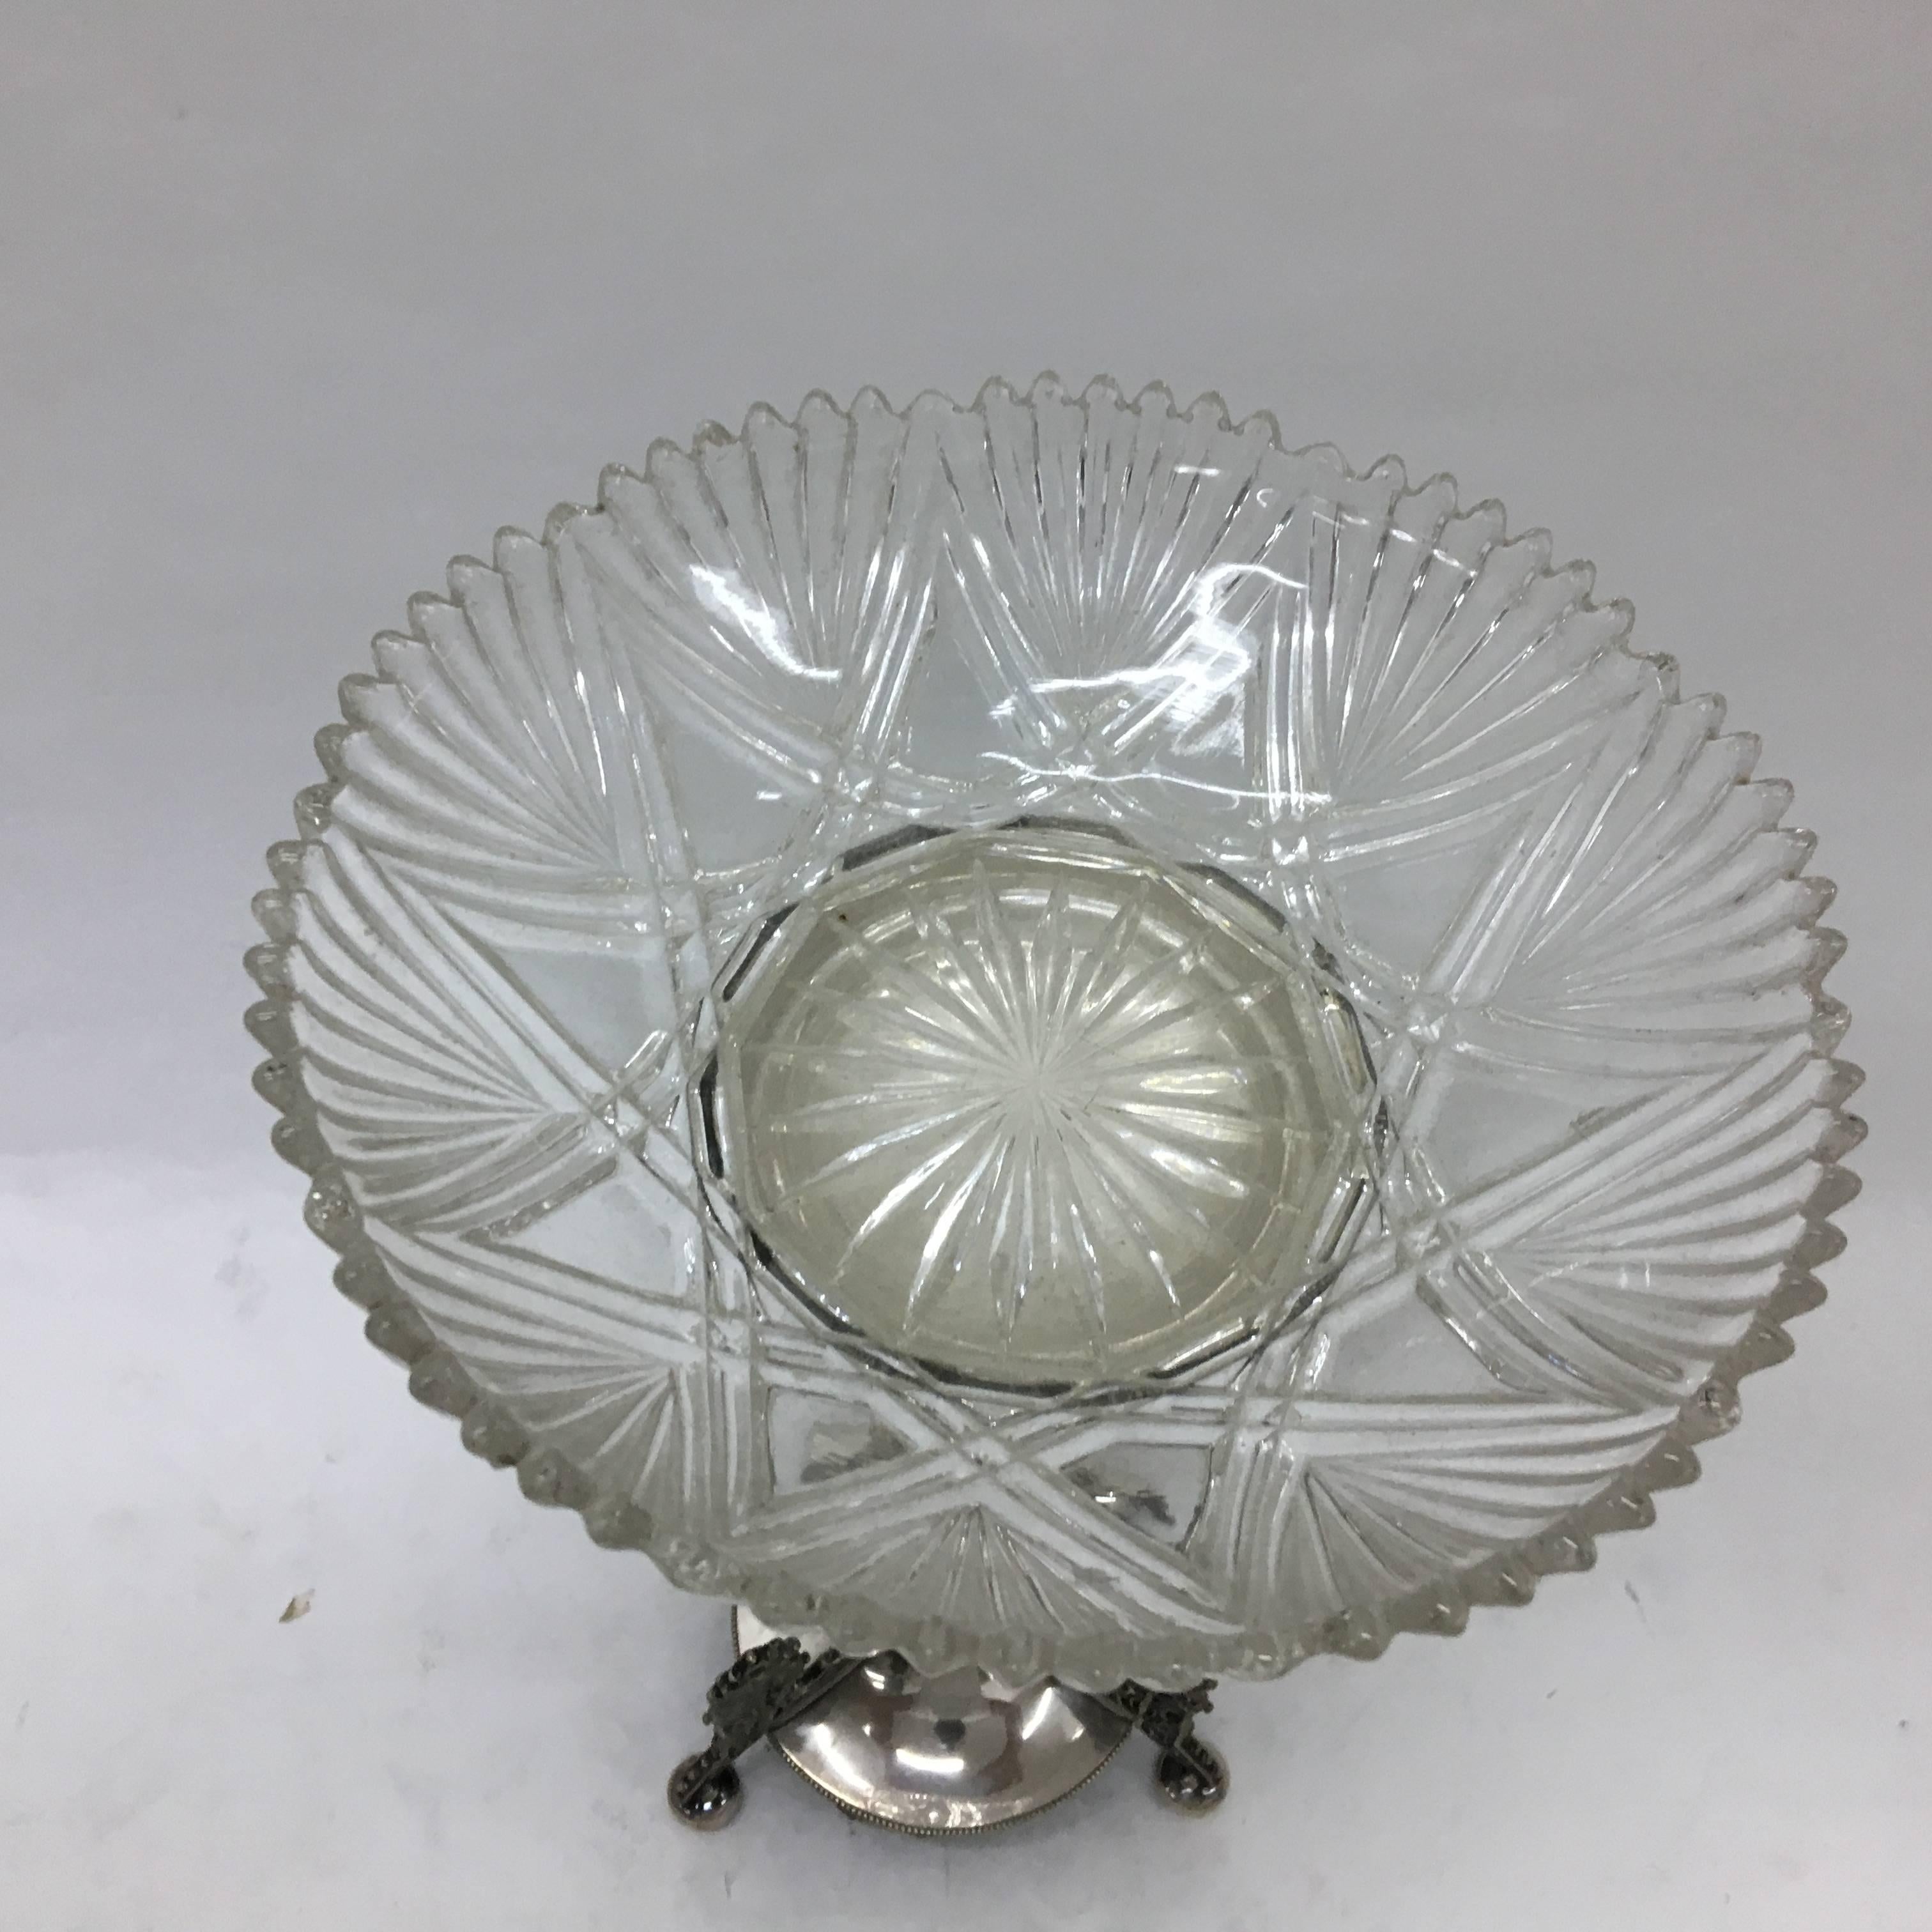 Victorian Silver Plated Centerpiece by Horace Woodward & Co., circa 1856 5